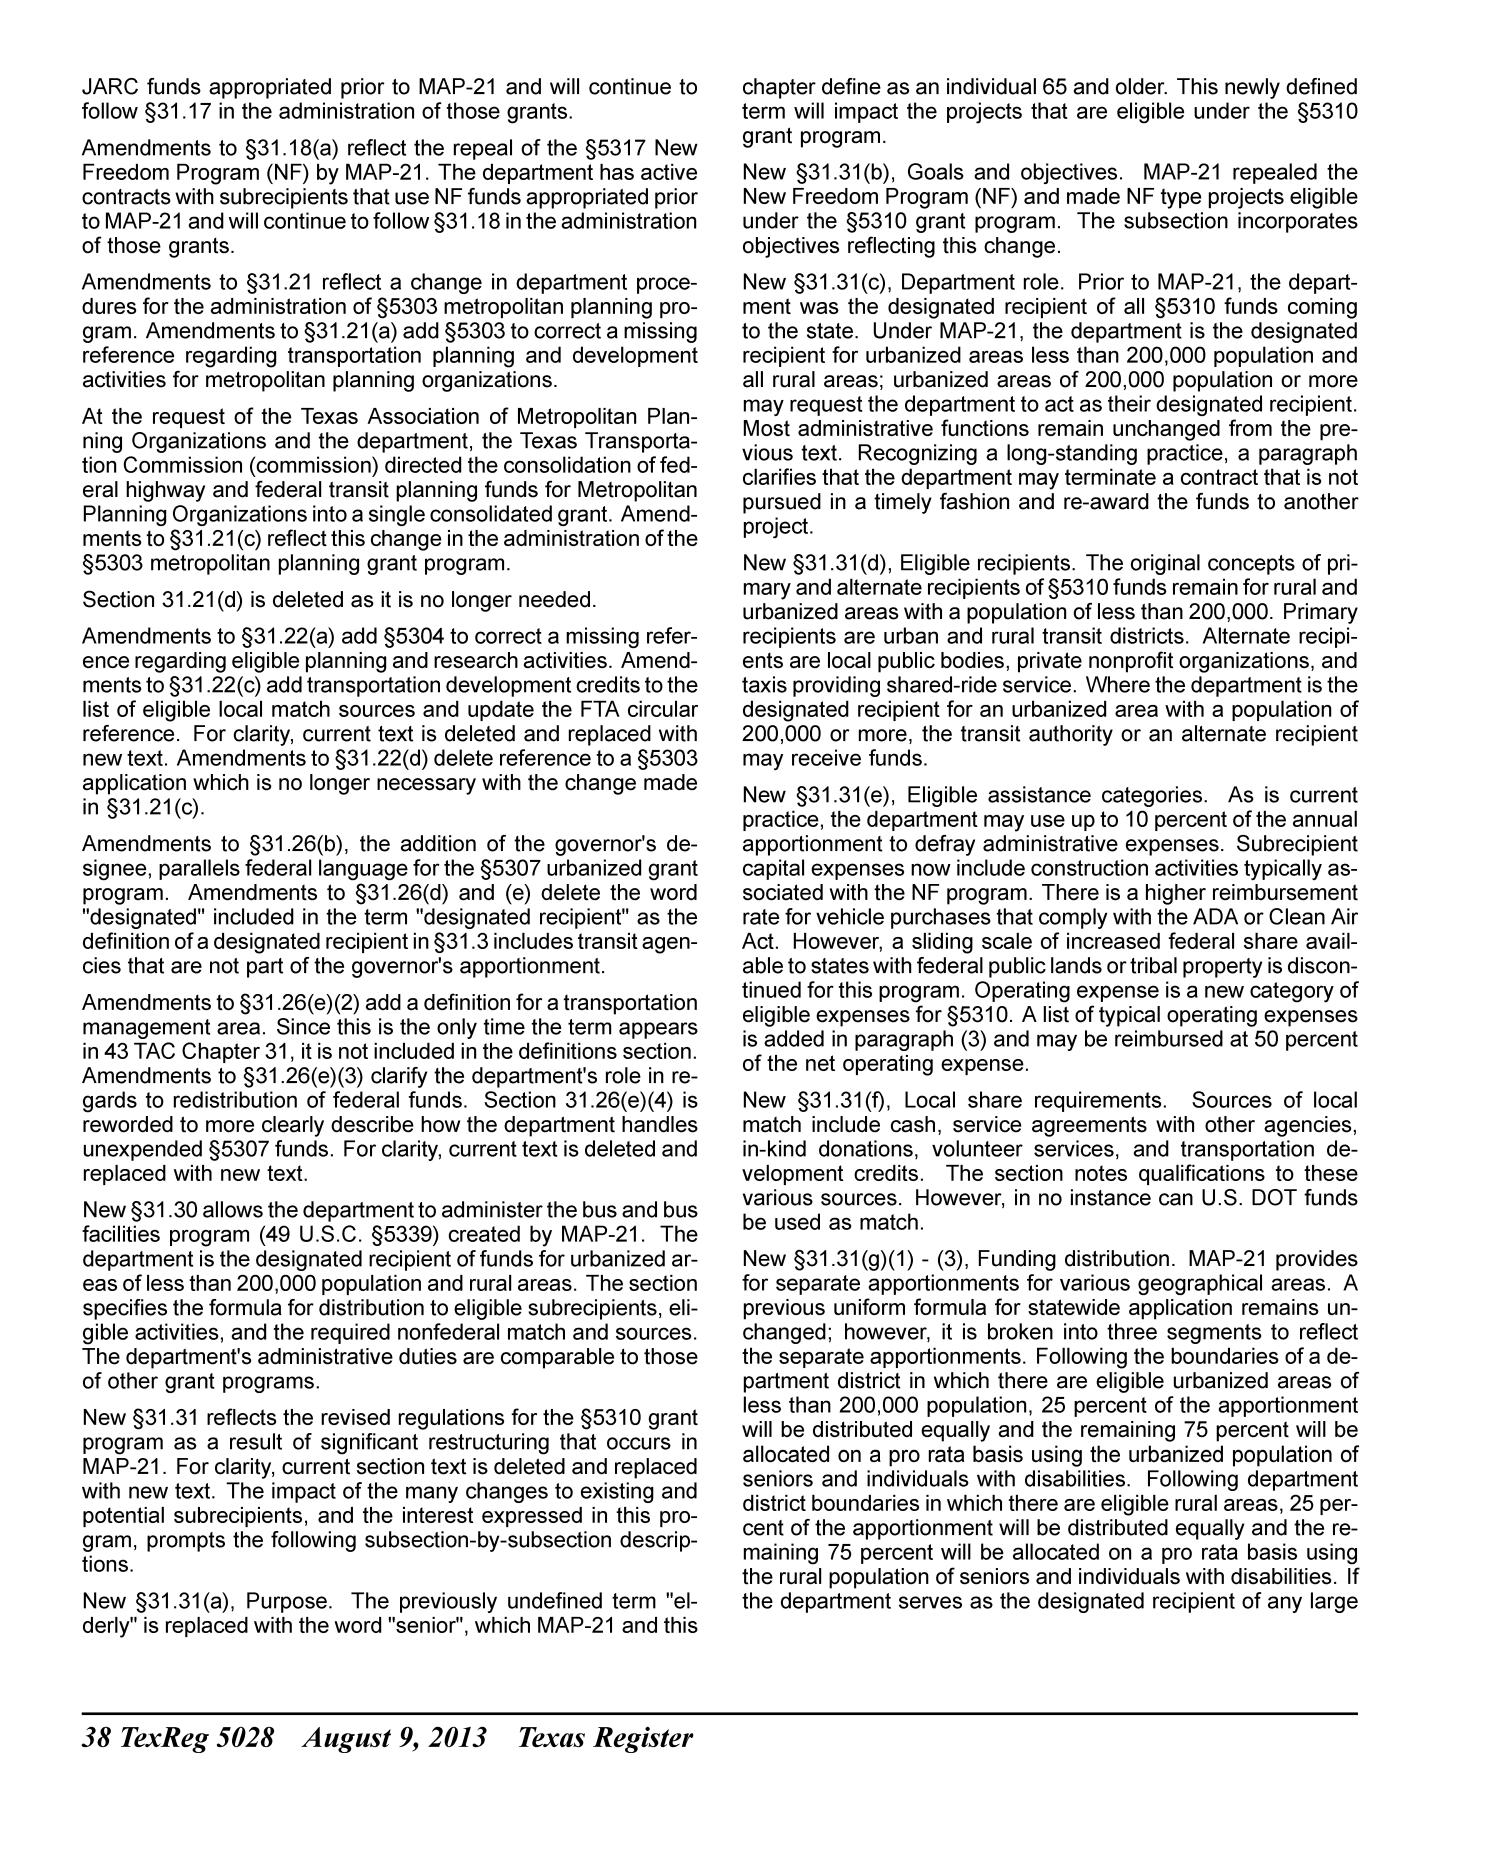 Texas Register, Volume 38, Number 32, Pages 4957-5134, August 9, 2013
                                                
                                                    5028
                                                